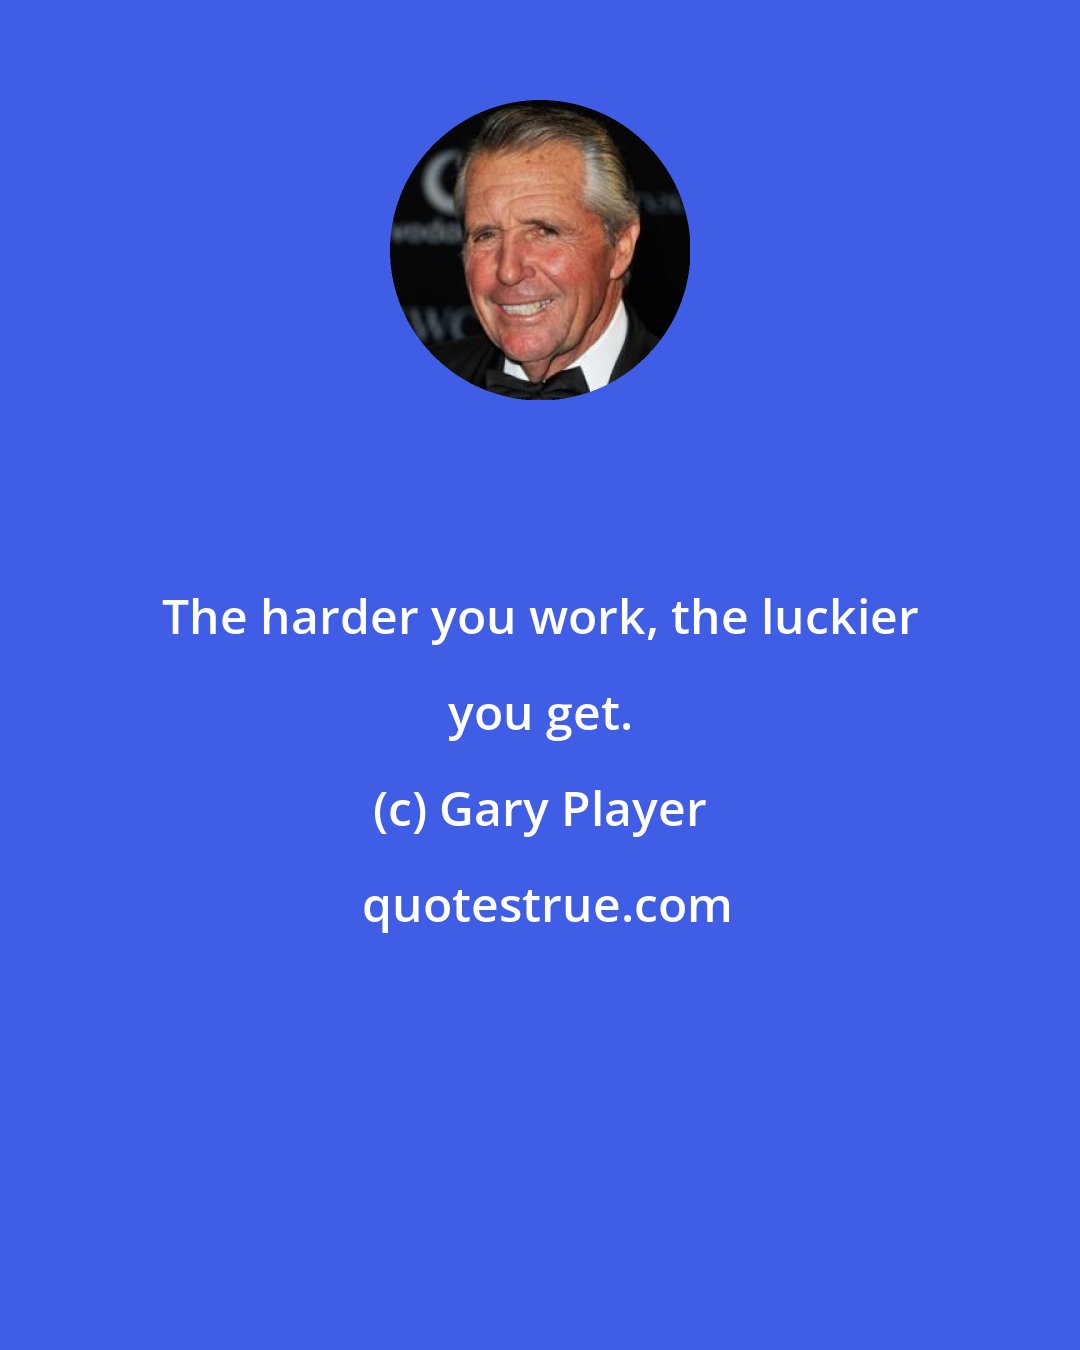 Gary Player: The harder you work, the luckier you get.